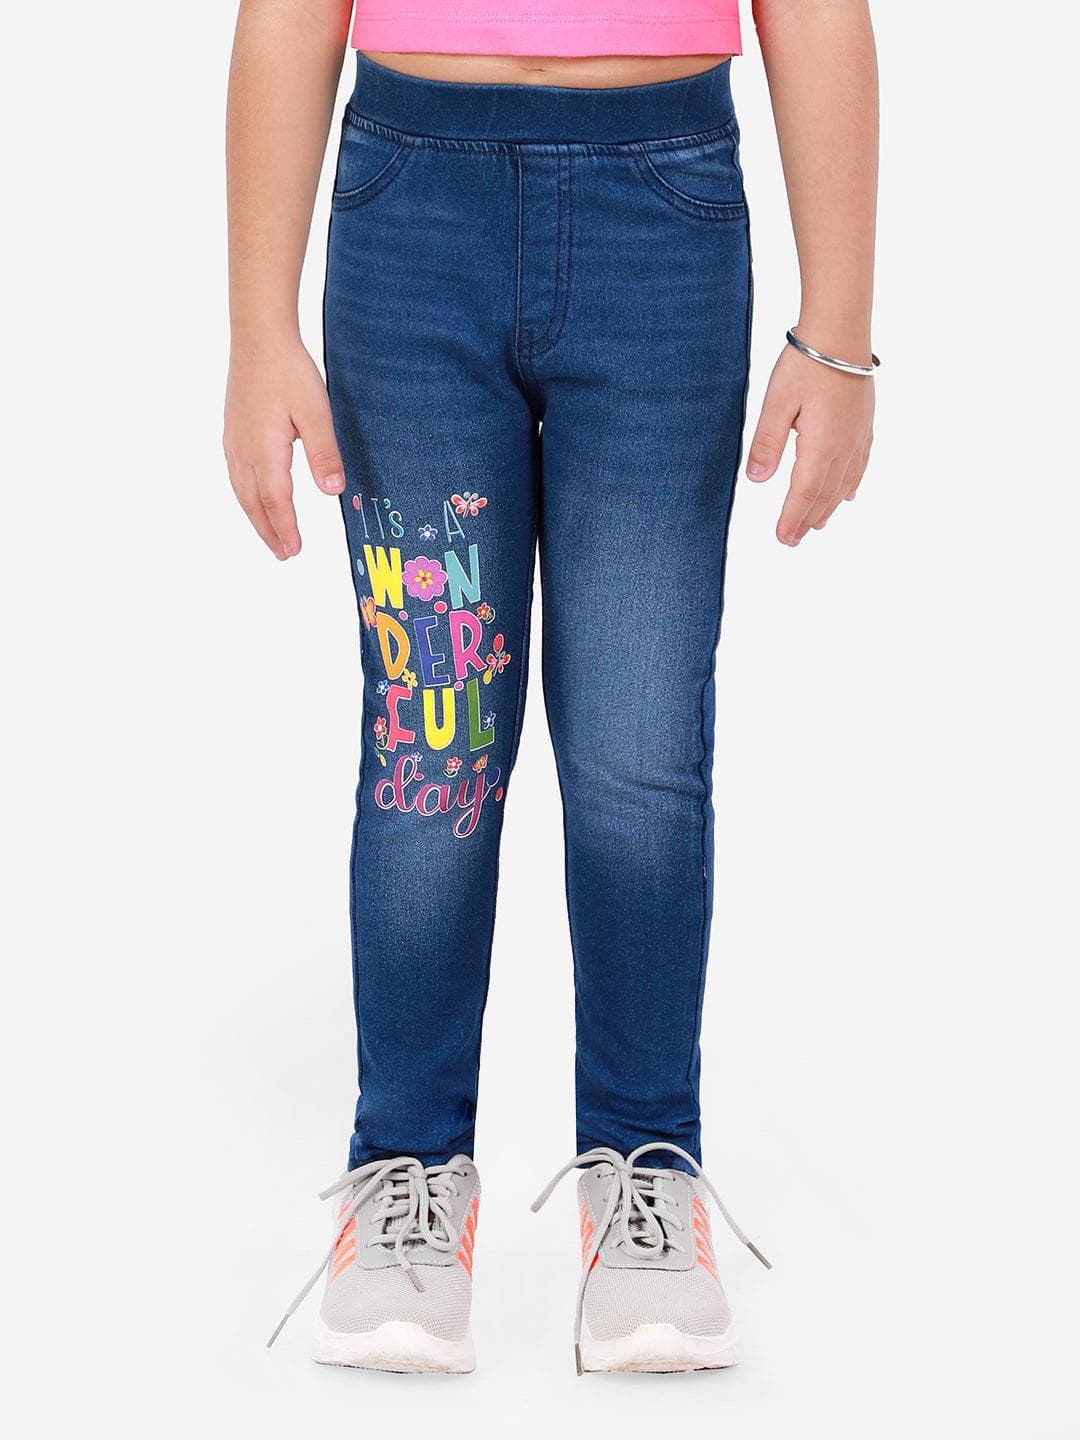 Naughty Ninos Girls Stretch Denim Jeggings for 5 to 15 years